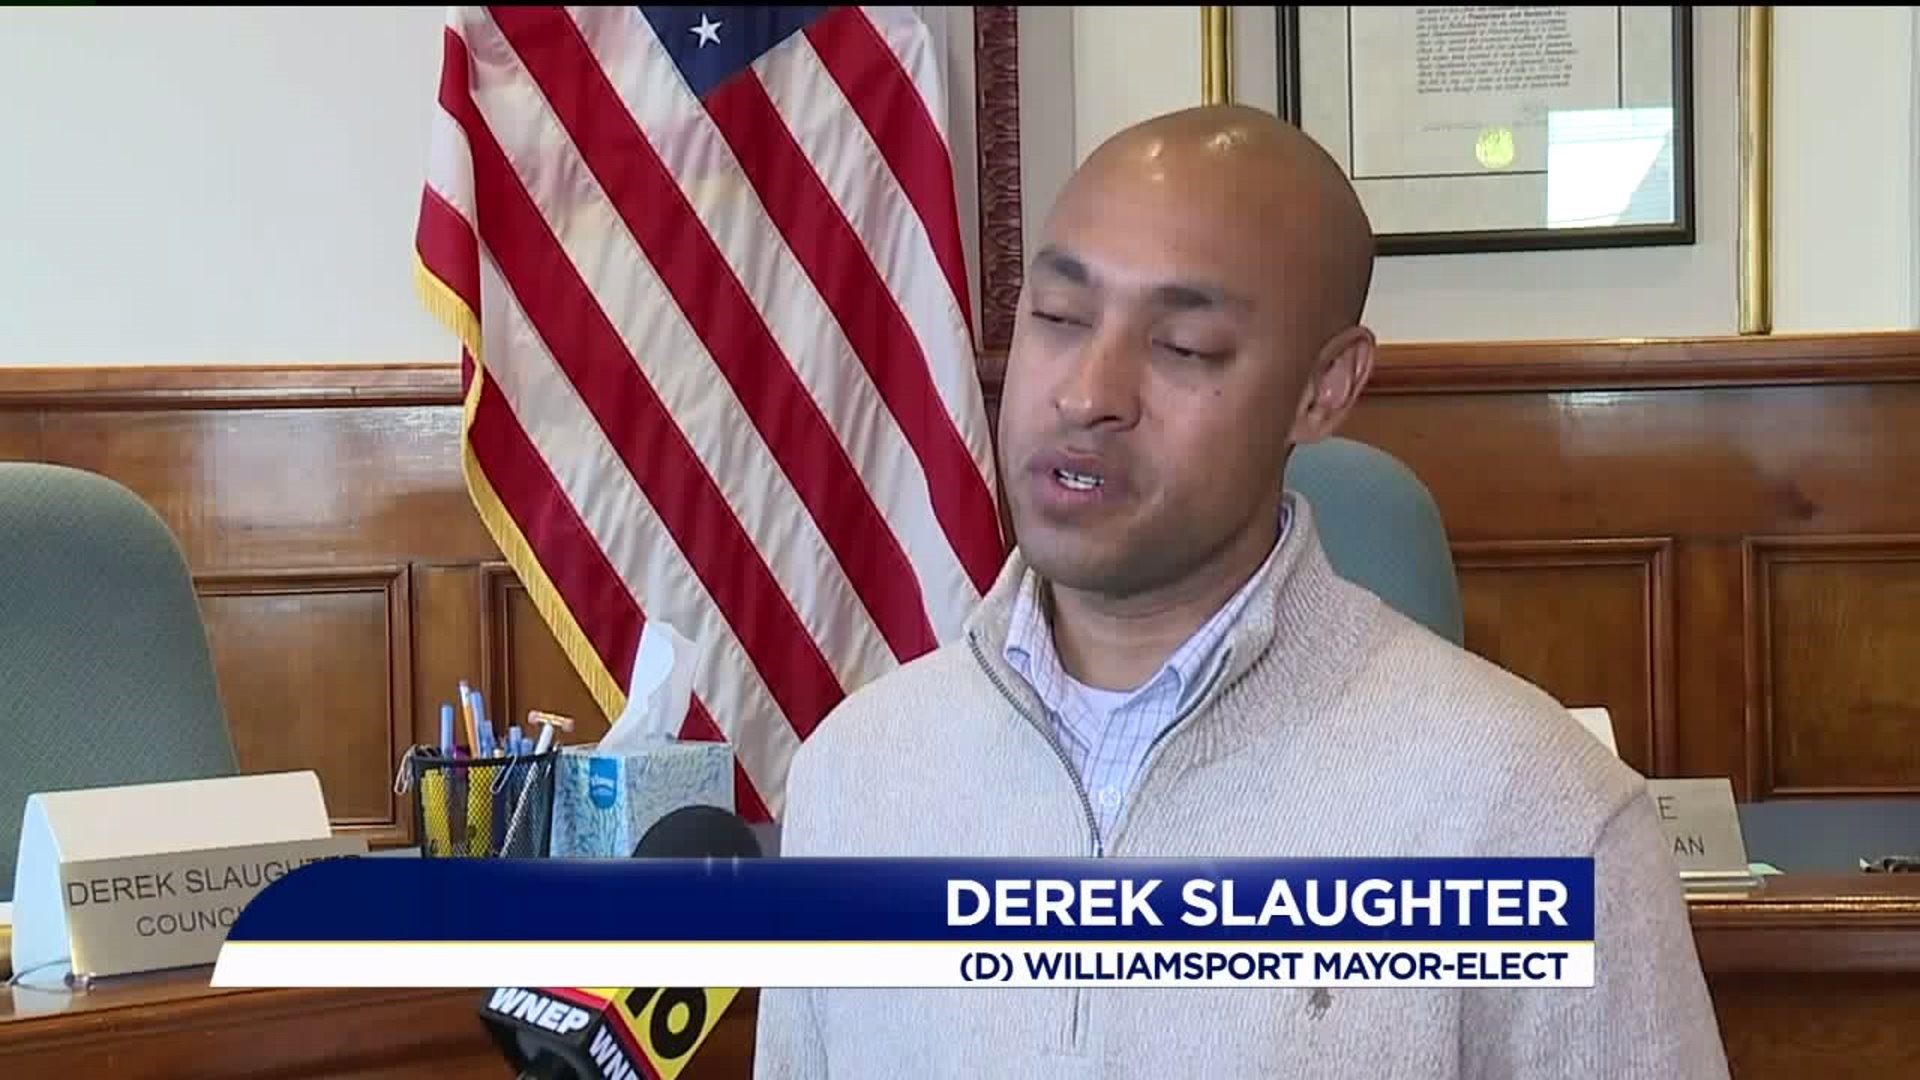 Slaughter Prepares for New Role as Williamsport Mayor